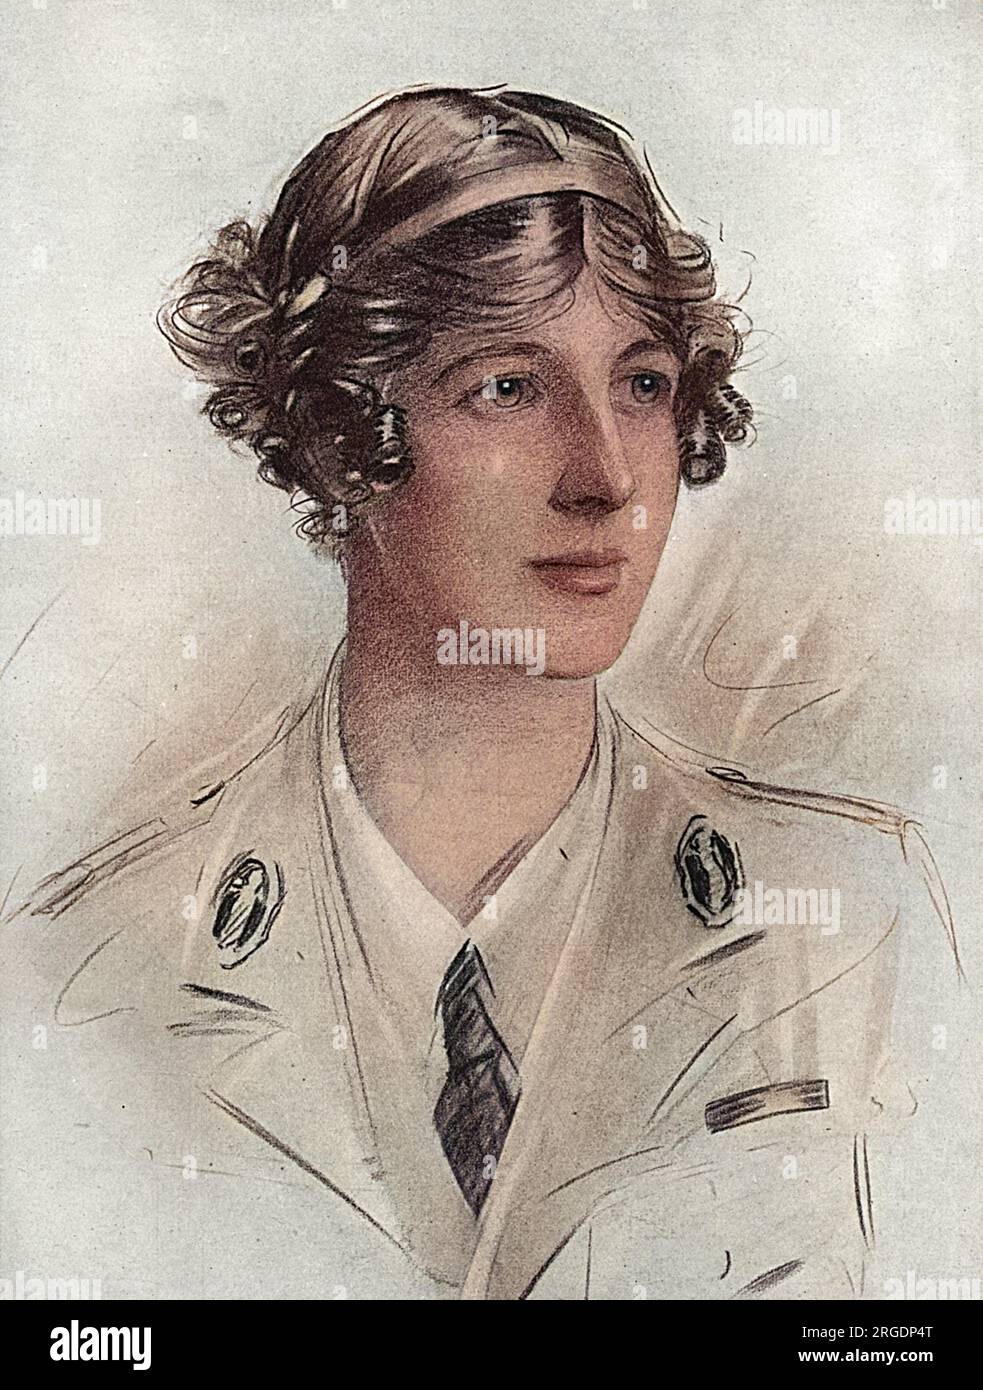 Lady Londonderry, formerly the Hon. Edith Chaplin, pictured in 1918 when she was President of the Women's War Services Legion (previously known as the Women's Legion) which provided military cooks and motor drivers for the War Office.  She was awarded the Order of the Dame of the British Empire for her work during the war. Stock Photo